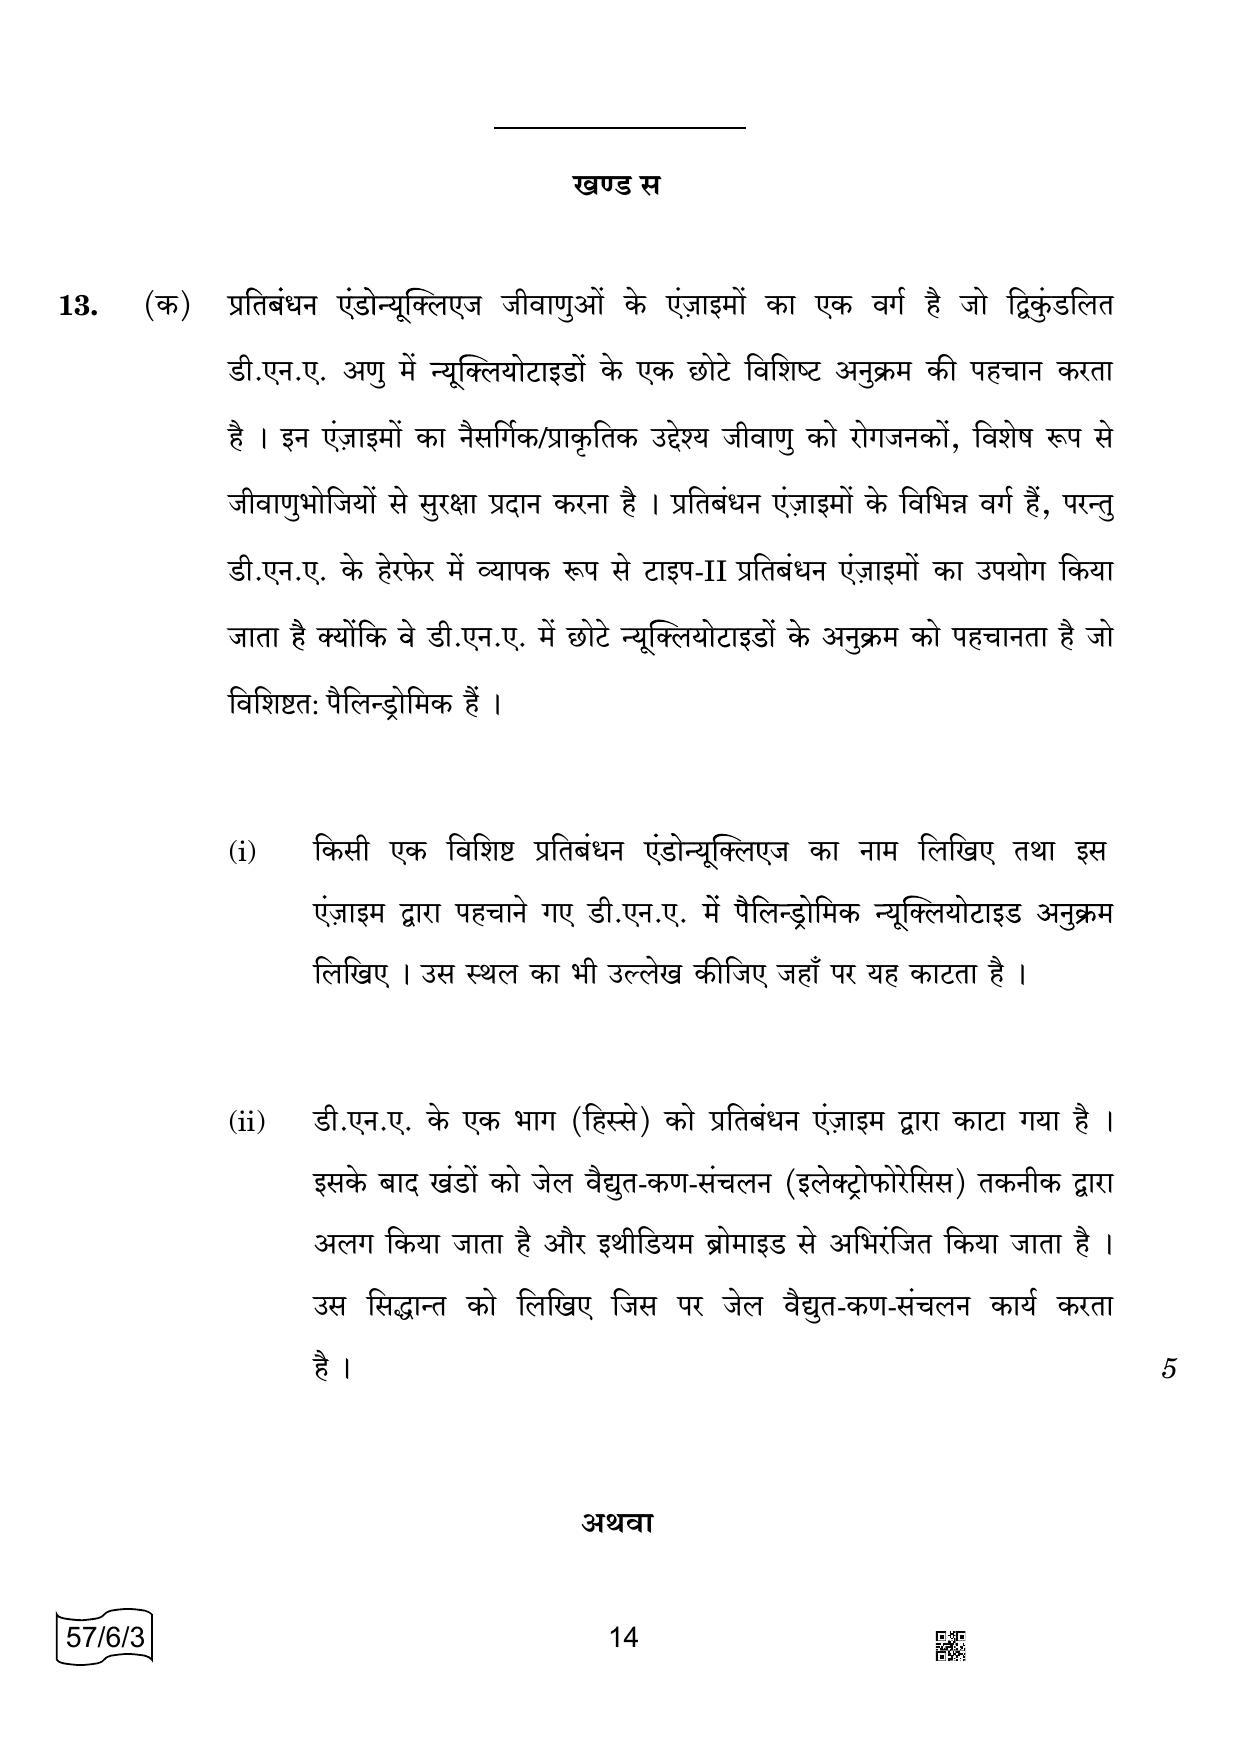 CBSE Class 12 57-6-3 BIOLOGY 2022 Compartment Question Paper - Page 14